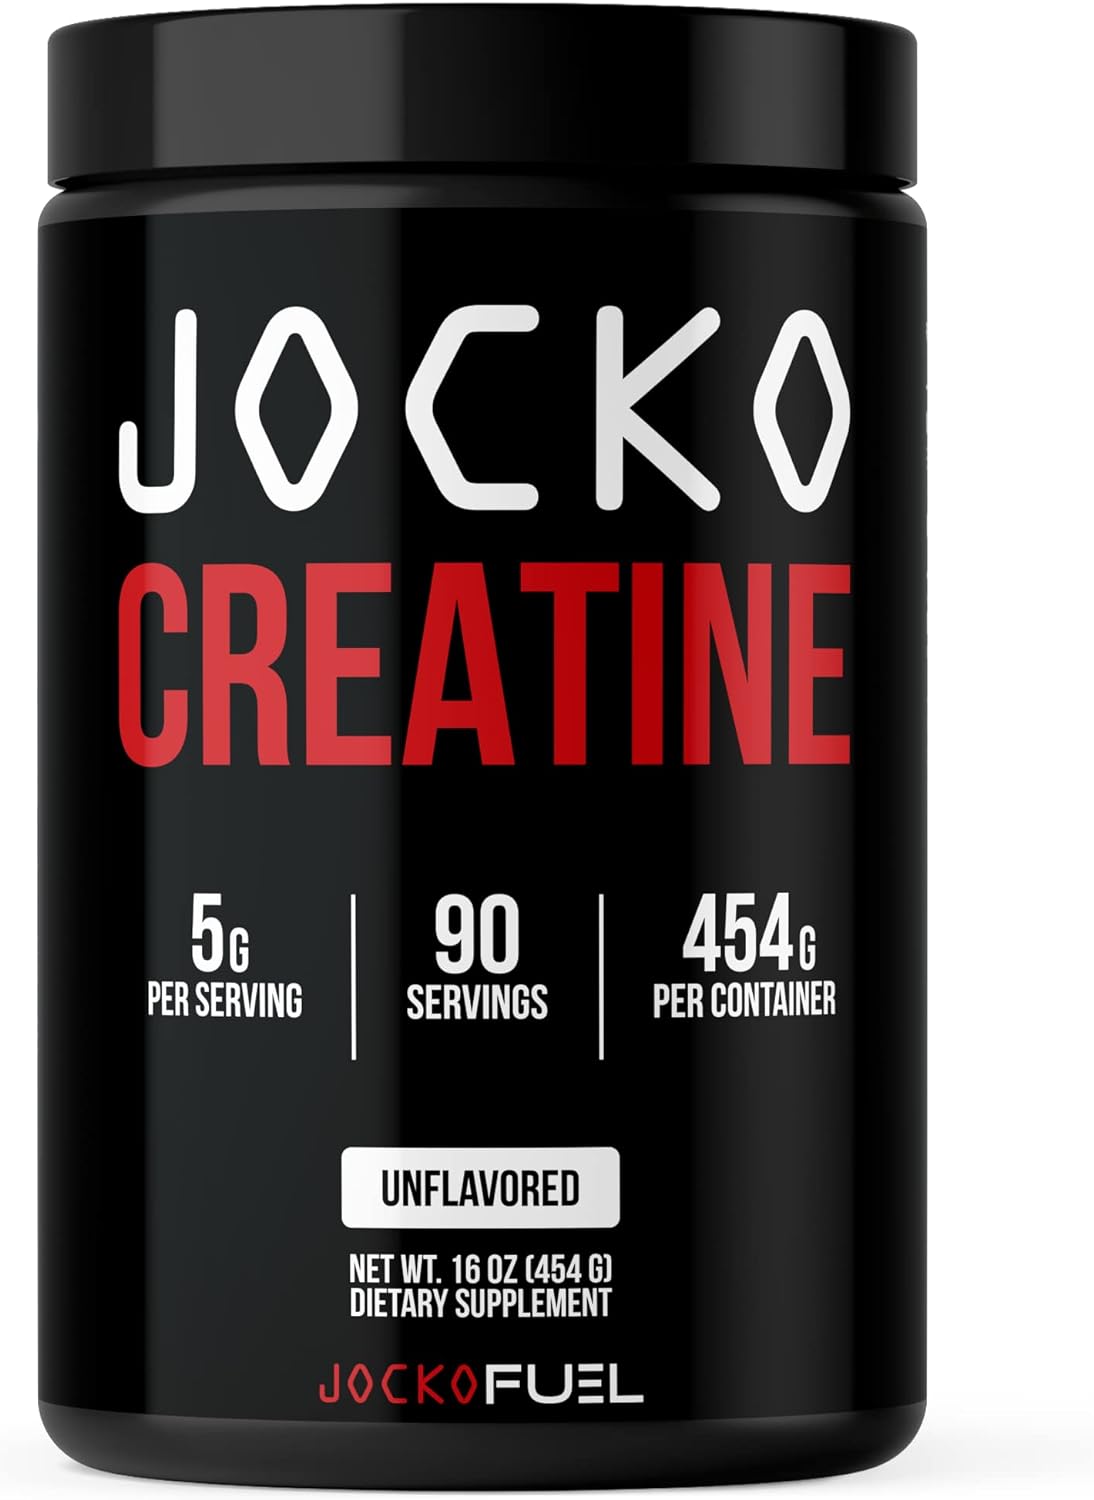 Jocko Fuel Creatine Monohydrate Powder - Creatine for Men Women, Supplement for Athletic Performance Muscle Health, 90 Servings 16 oz (Unflavored)